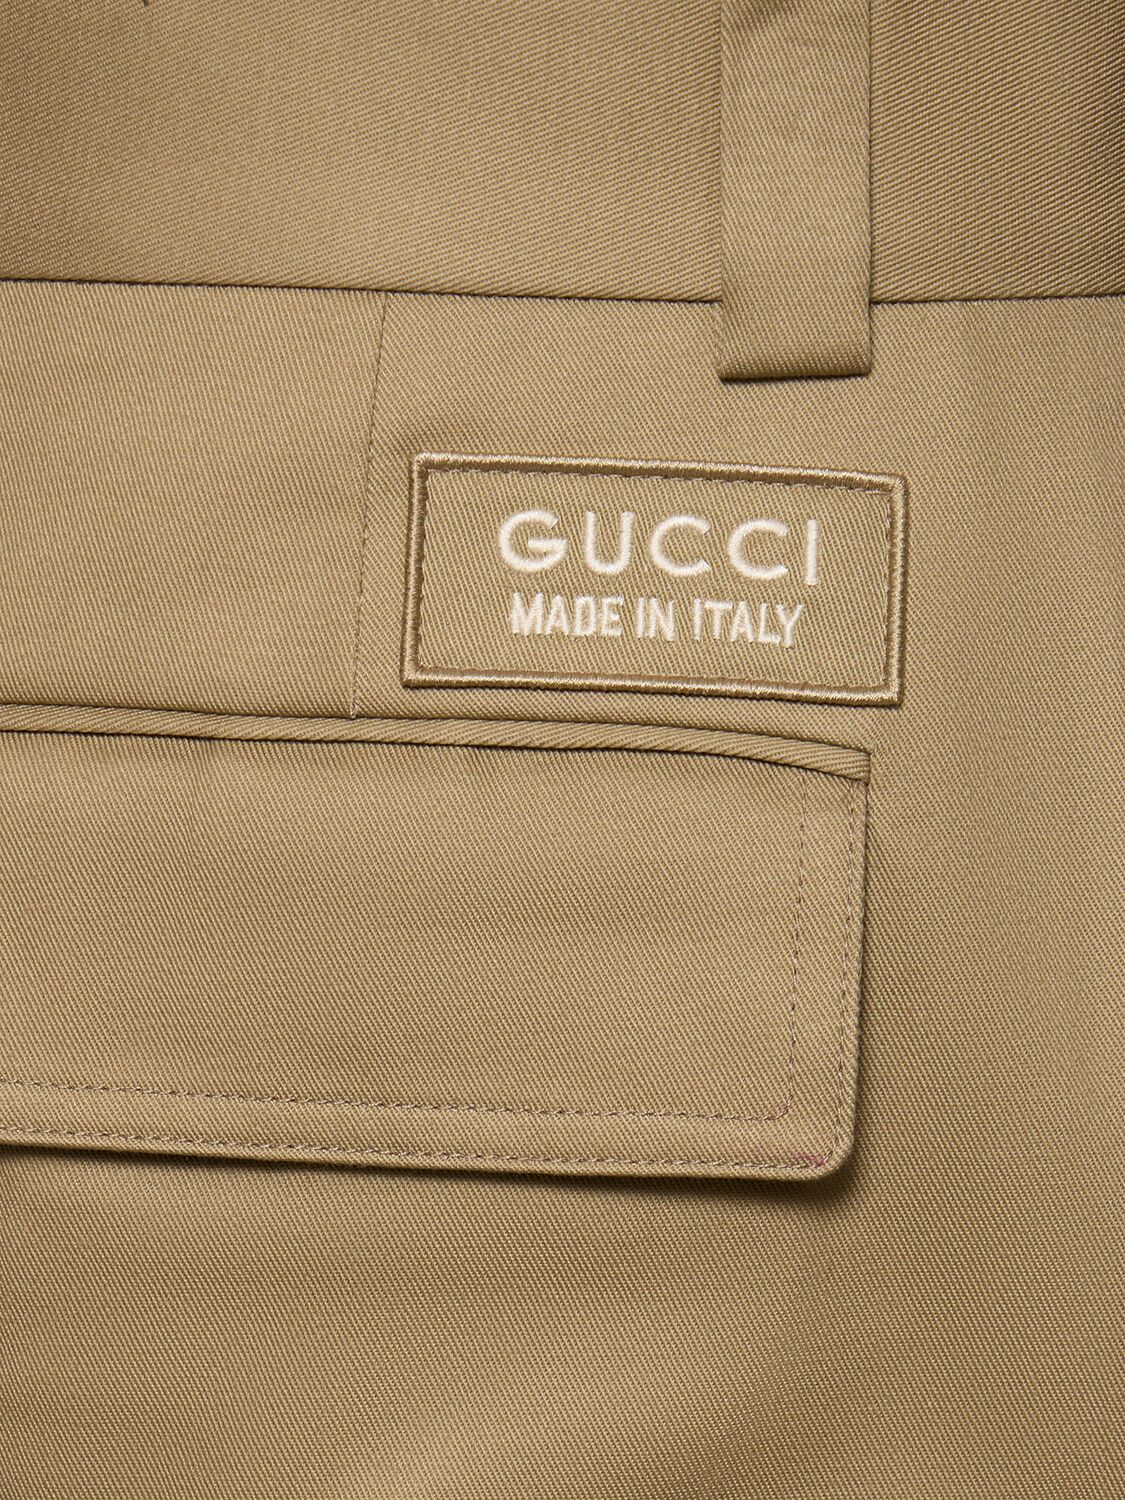 Shop Gucci Military Cotton Drill Cargo Pants In Cereal